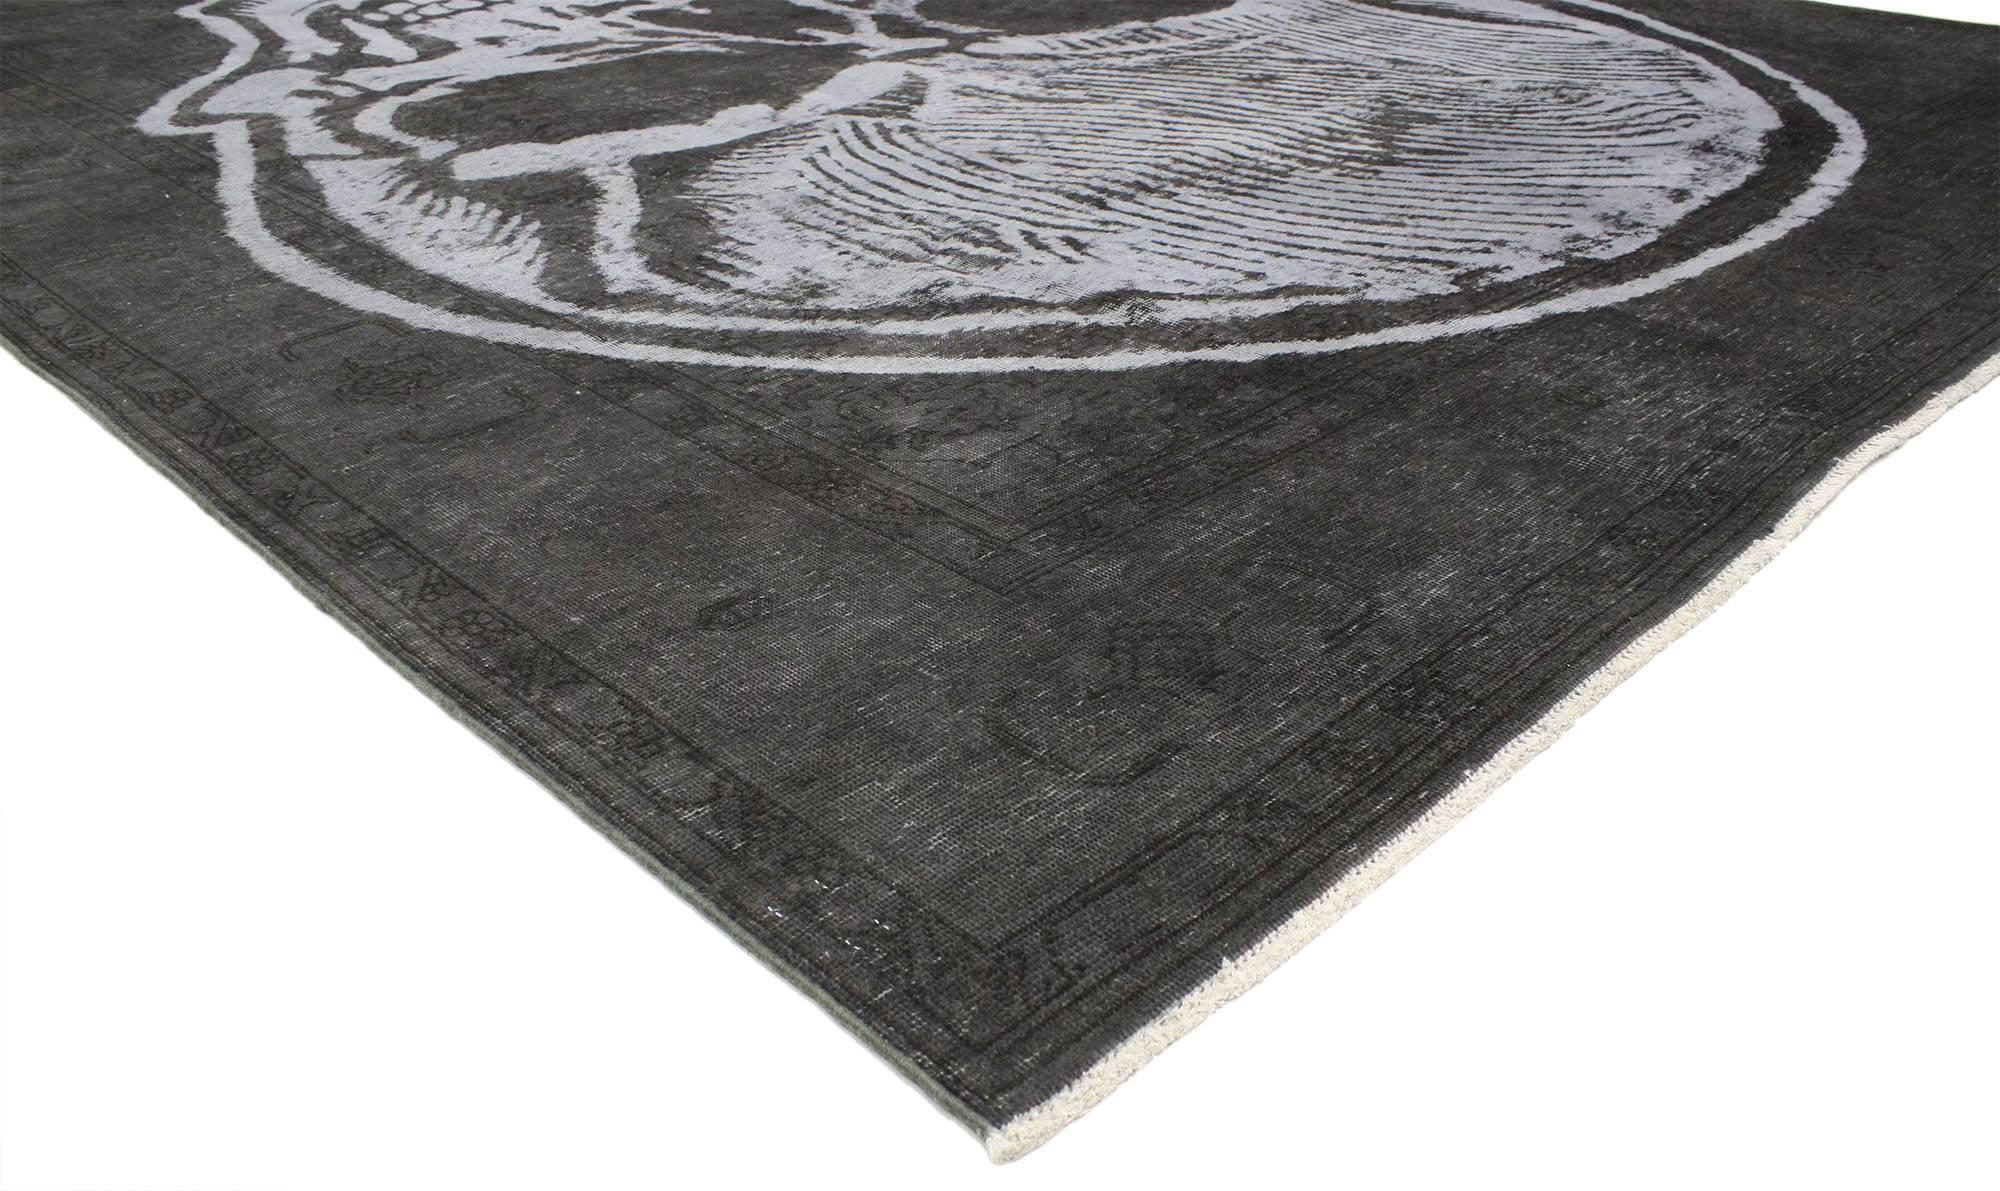 80432, Distressed Vintage Skull Steampunk Style Area Rug Inspired by Alexander McQueen 09'08 x 12'05. Showcasing an expressive design with artful craftsmanship and incredible detail, this hand knotted wool distressed vintage overdyed skull rug is a